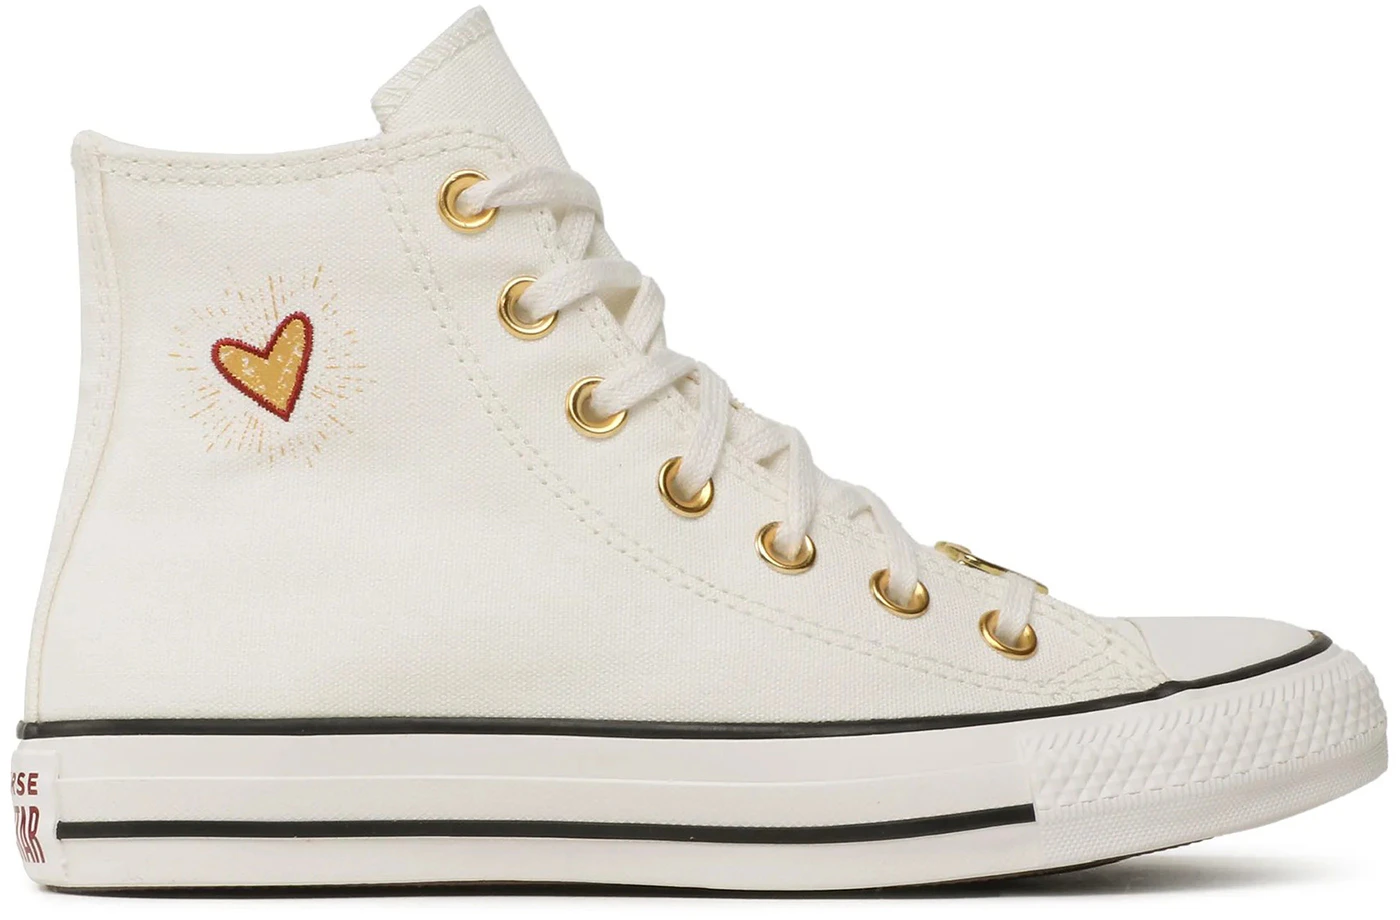 Lab hage Nybegynder Converse Chuck Taylor All-Star Hi Valentine's Day Vintage White (2023)  (Women's) - A05139C/A05139F - US